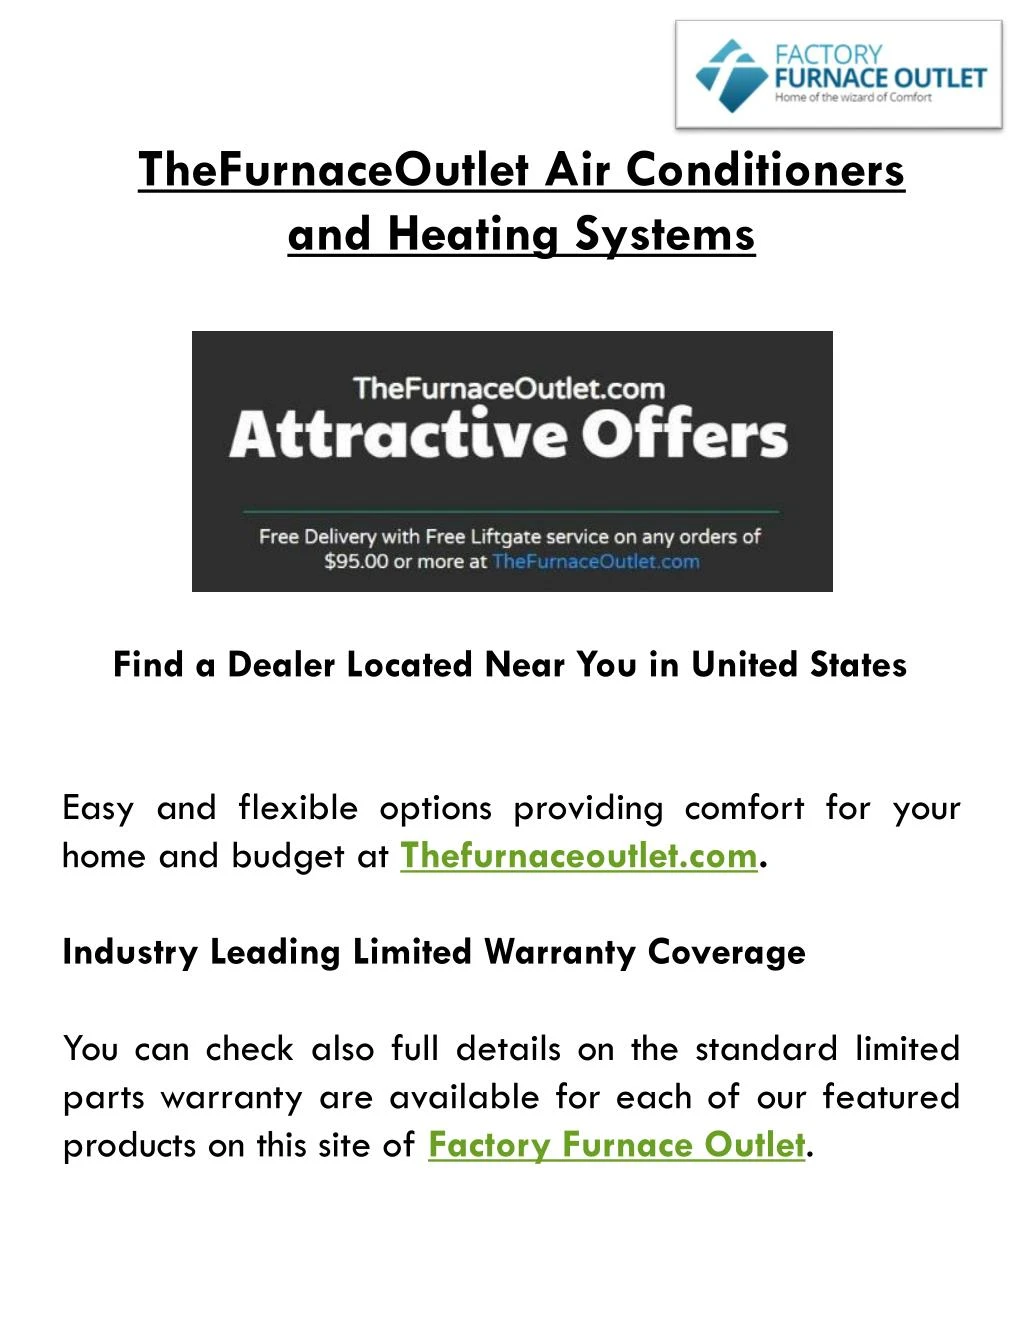 thefurnaceoutlet air conditioners and heating